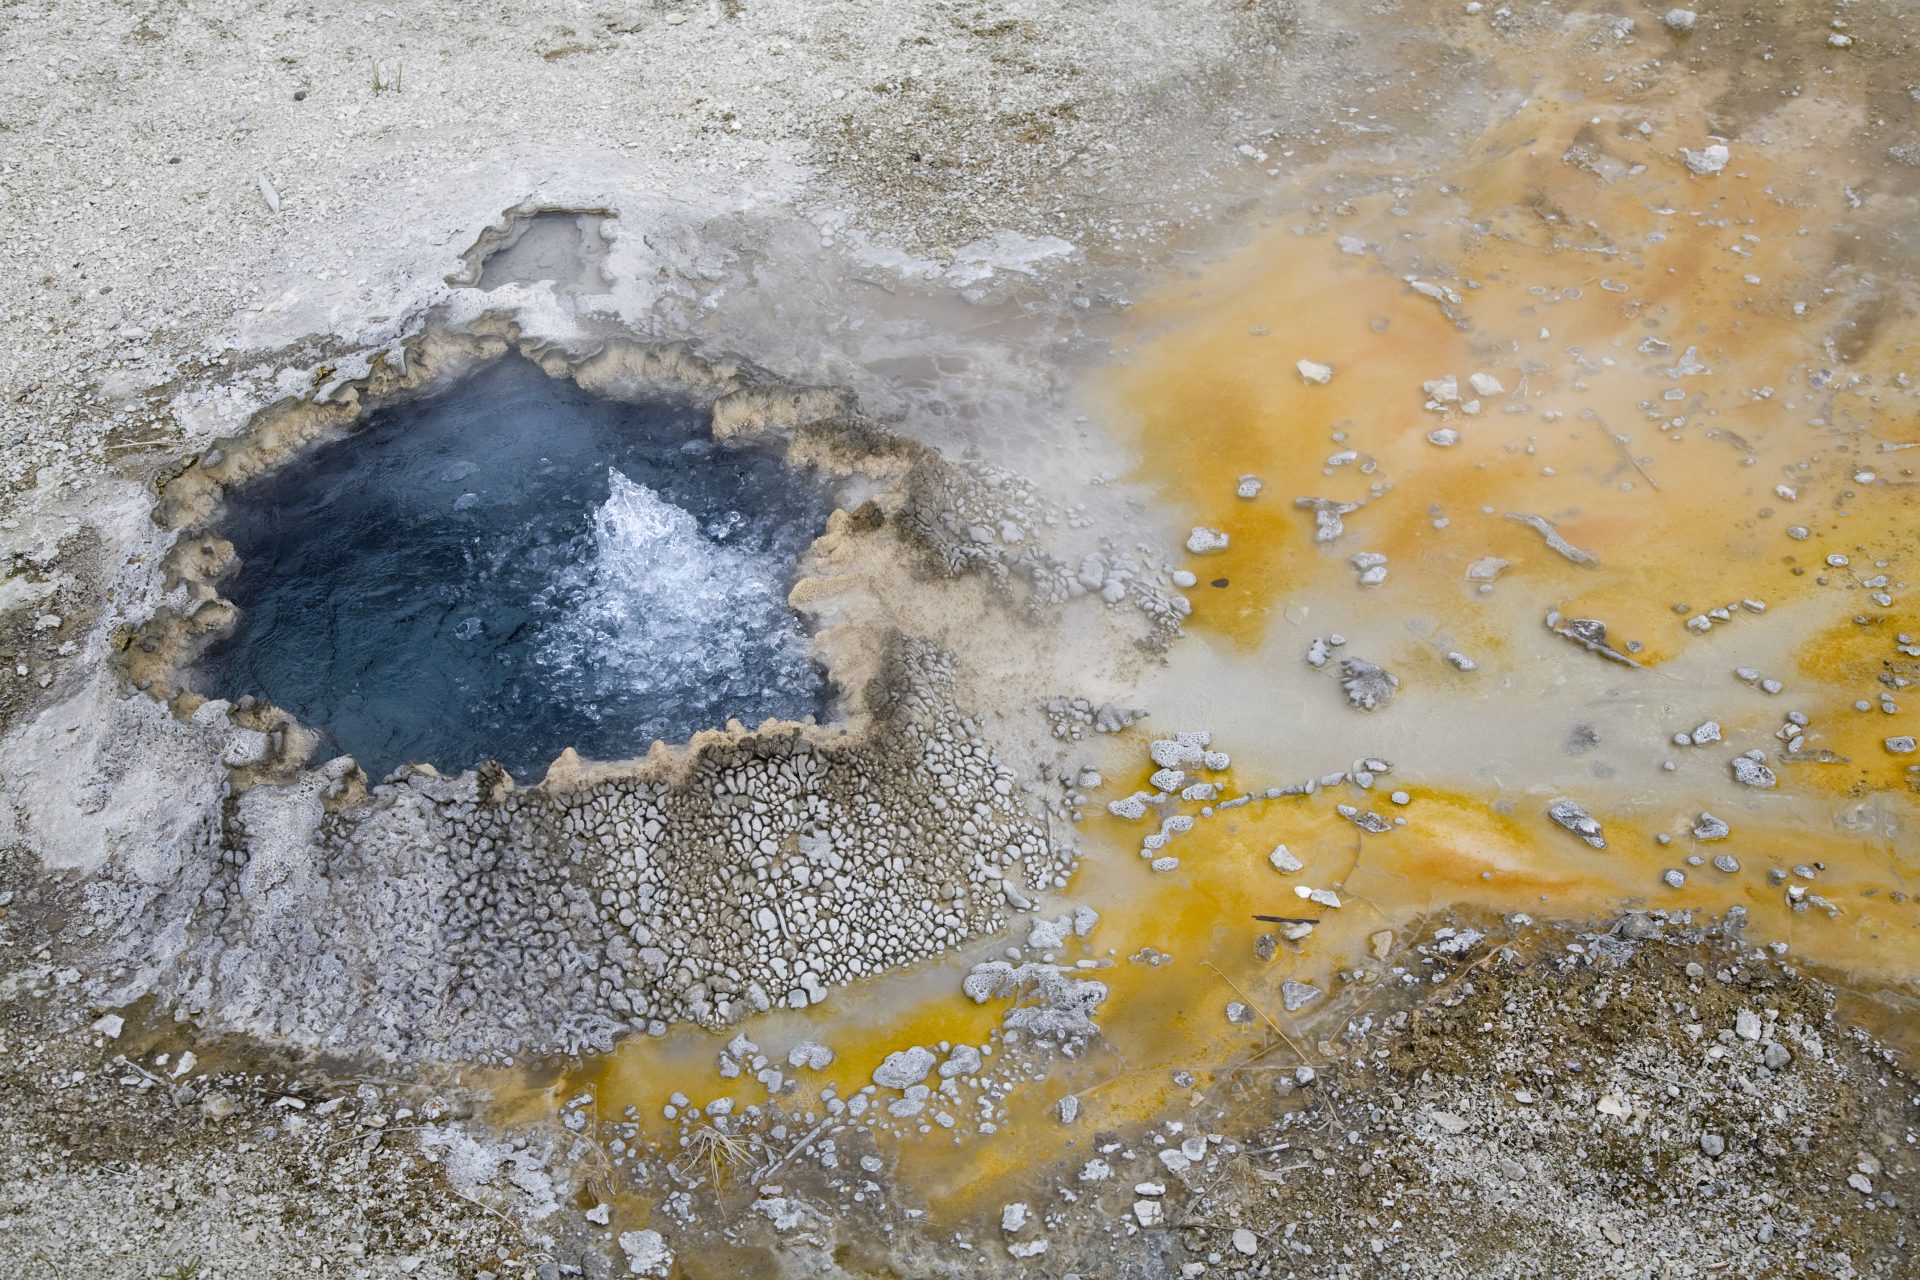 Yellowstone supervolcano eruption could trigger 'nuclear winter' and mass deaths